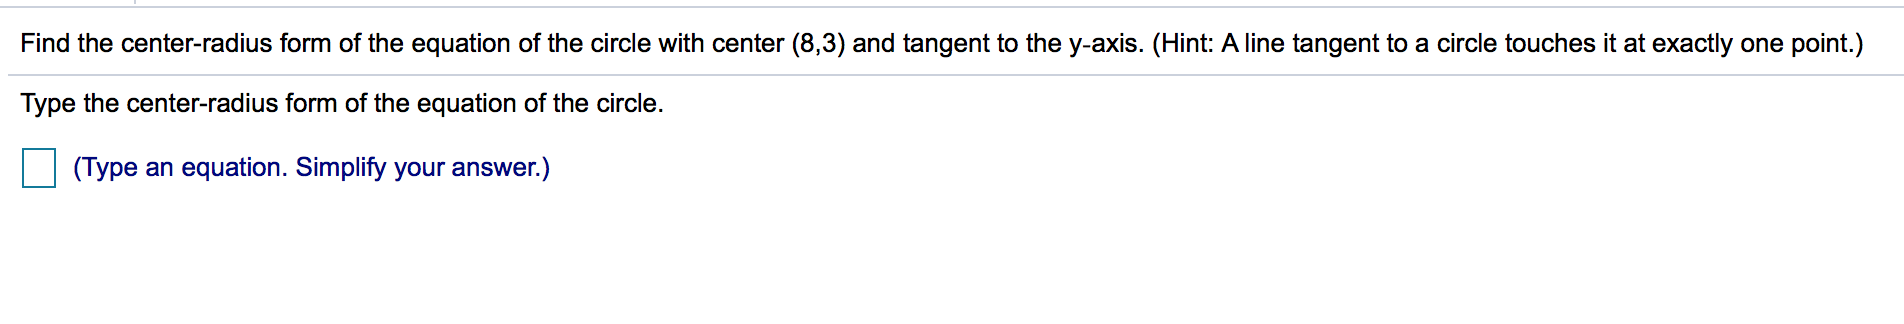 Find the center-radius form of the equation of the circle with center (8,3) and tangent to the y-axis. (Hint: A line tangent to a circle touches it at exactly one point.)
Type the center-radius form of the equation of the circle.
(Type an equation. Simplify your answer.)
